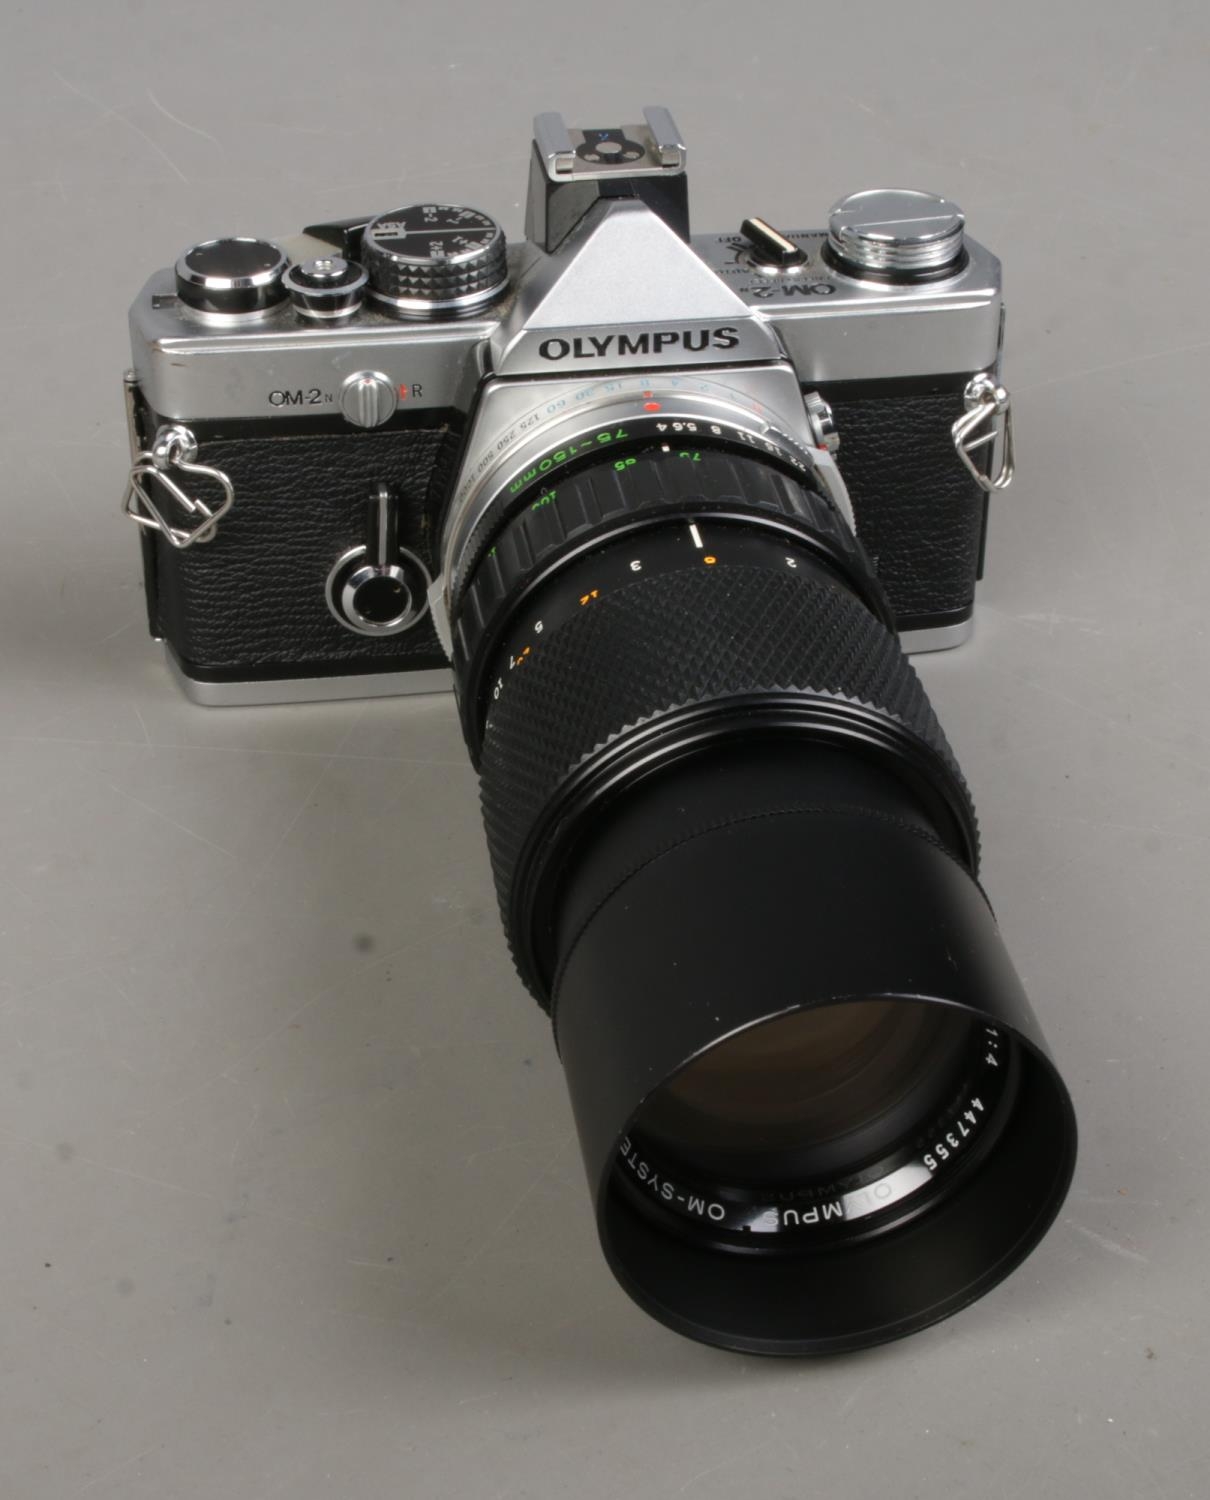 An Olympus OM-2 MD SLR camera fitted with OM-System Zuiko lens along with variety of accessories - Image 2 of 2